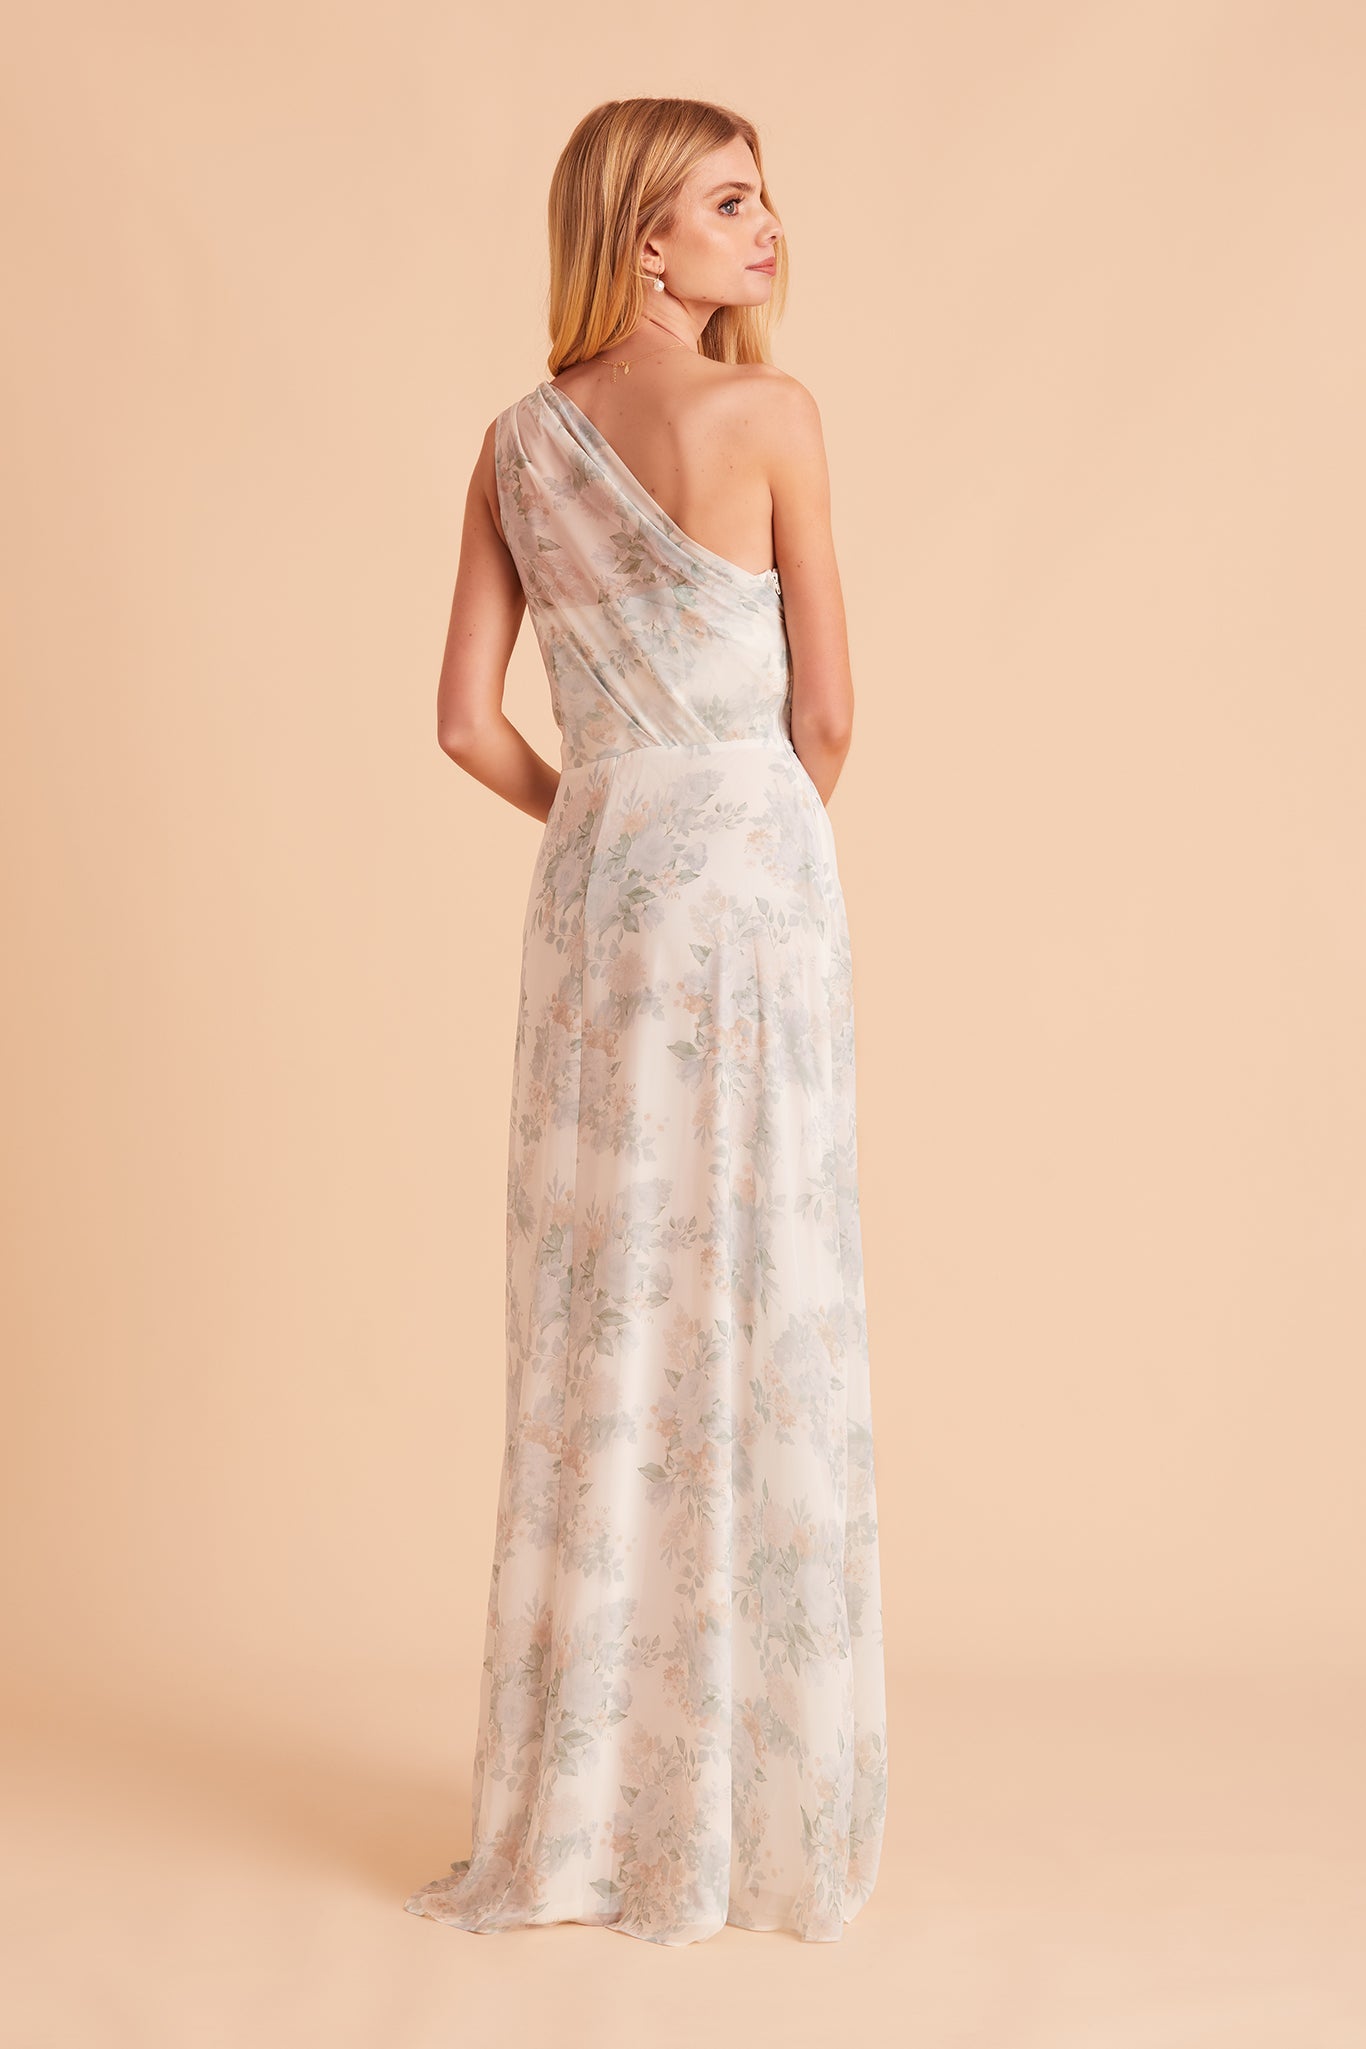 Kira bridesmaid dress in sage bouquet floral print chiffon by Birdy Grey, back view